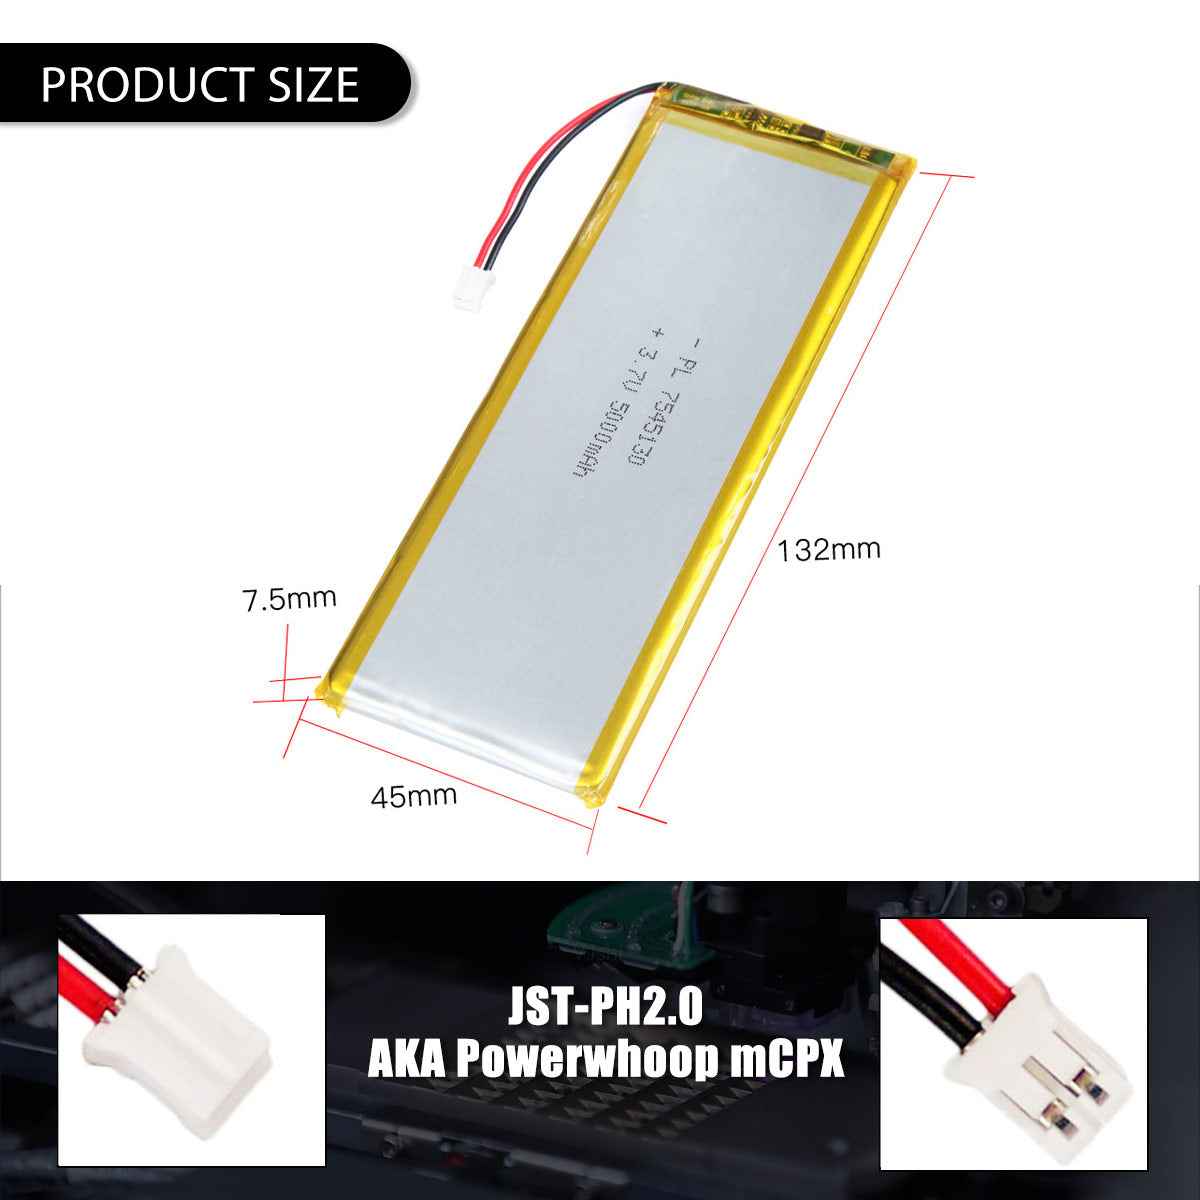 3.7V 5000mAh 7545130 Rechargeable Lithium Polymer Battery